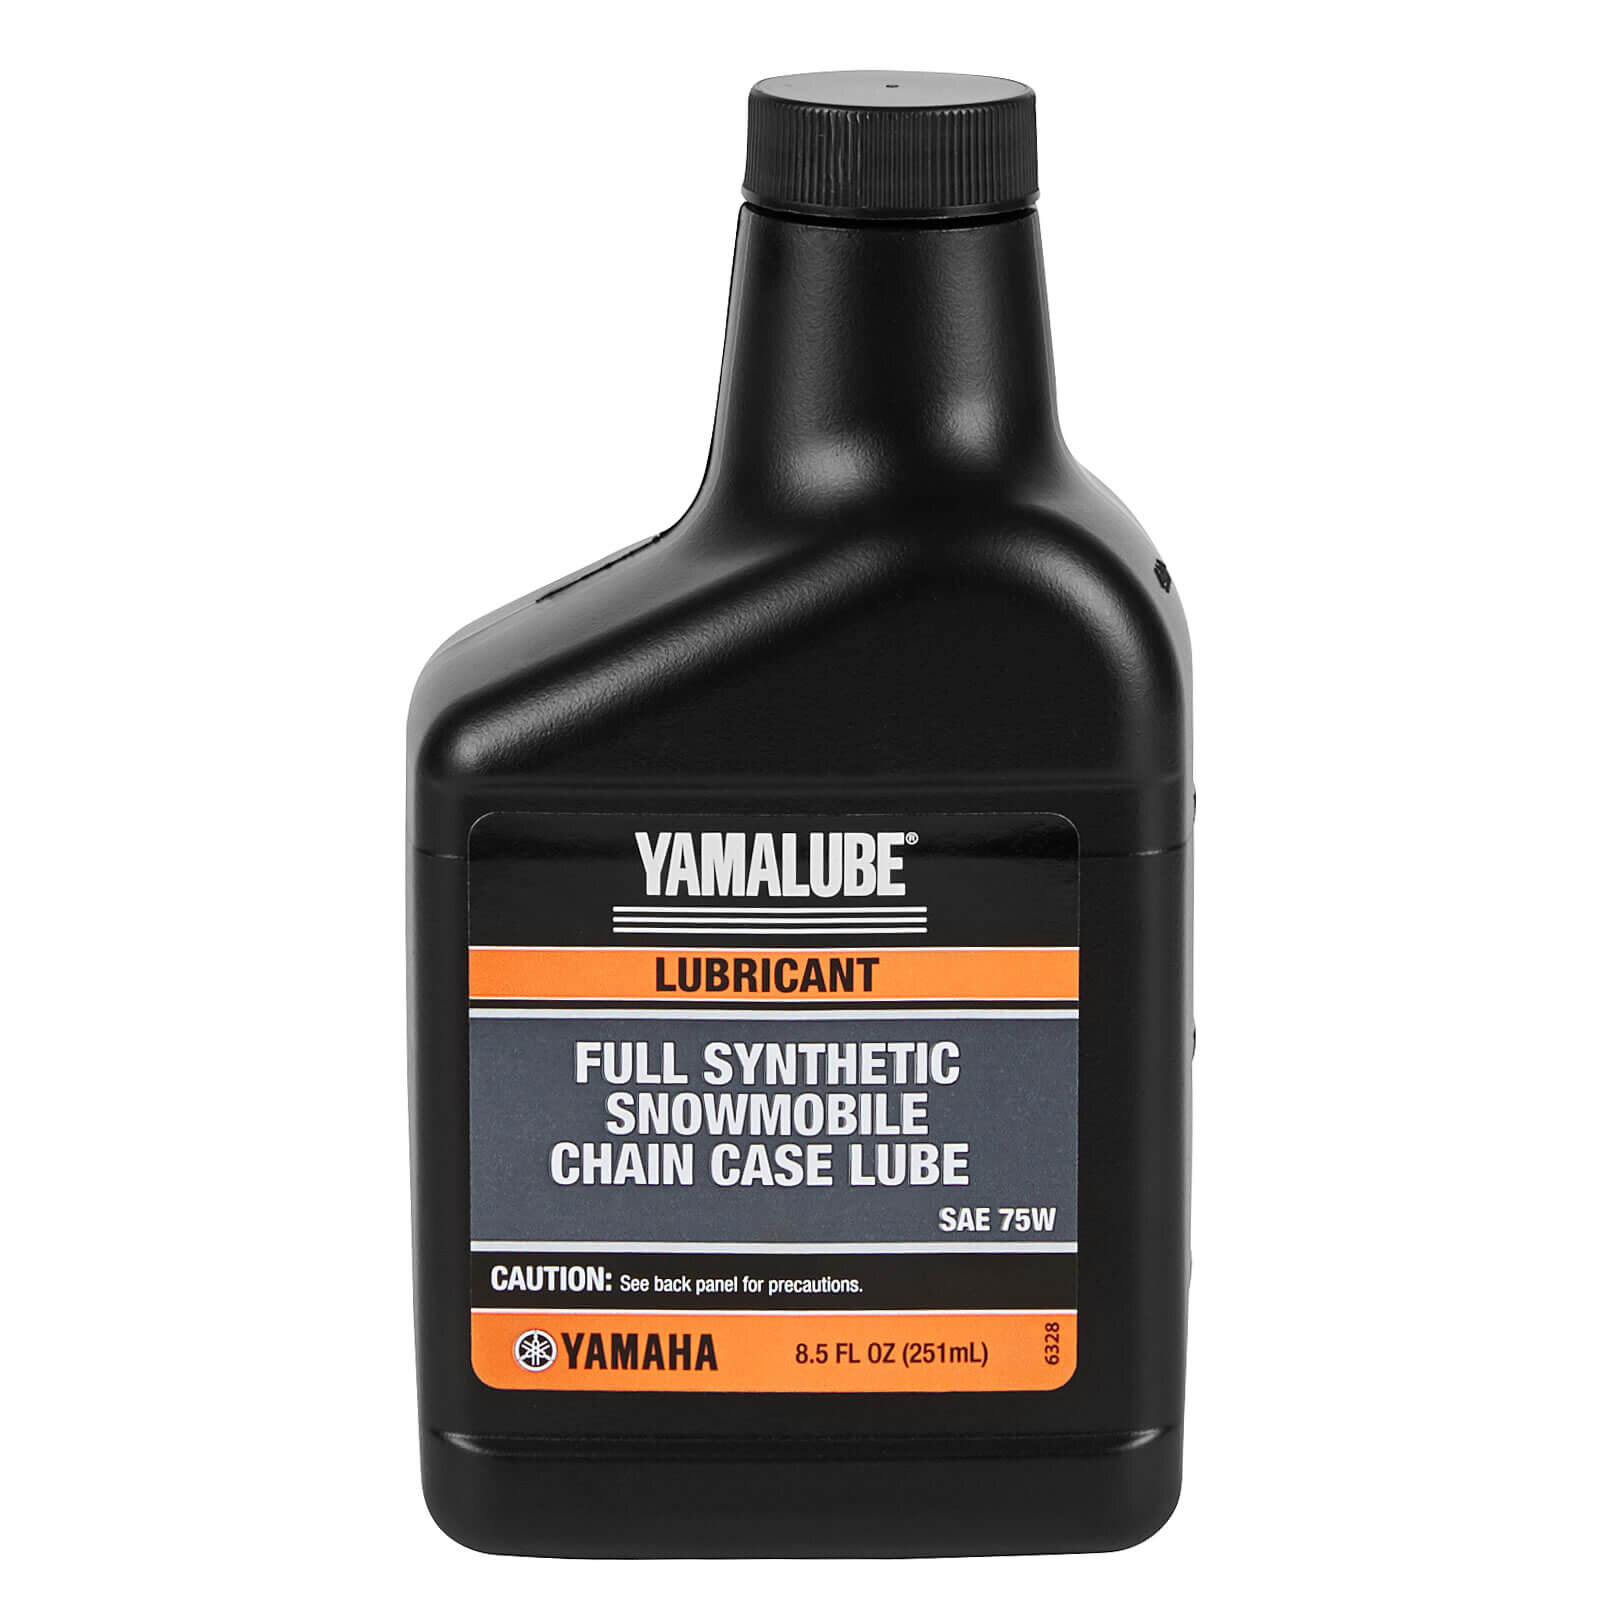 Yamalube® Full Synthetic Snowmobile Chain Case Lube